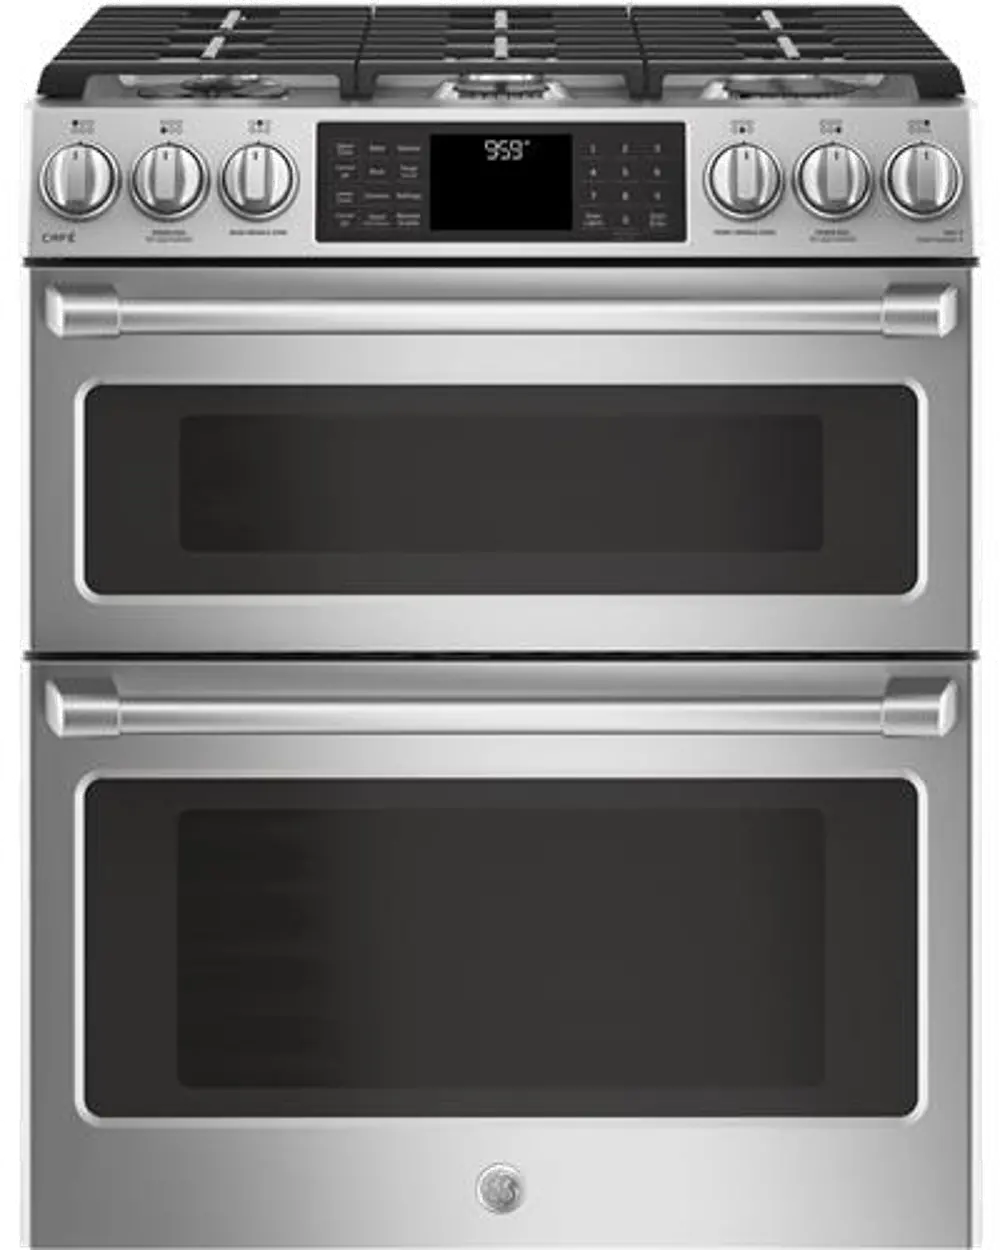 CGS995SELSS GE Cafe Double Oven Gas Range - 6.7 cu. ft. Stainless Steel-1